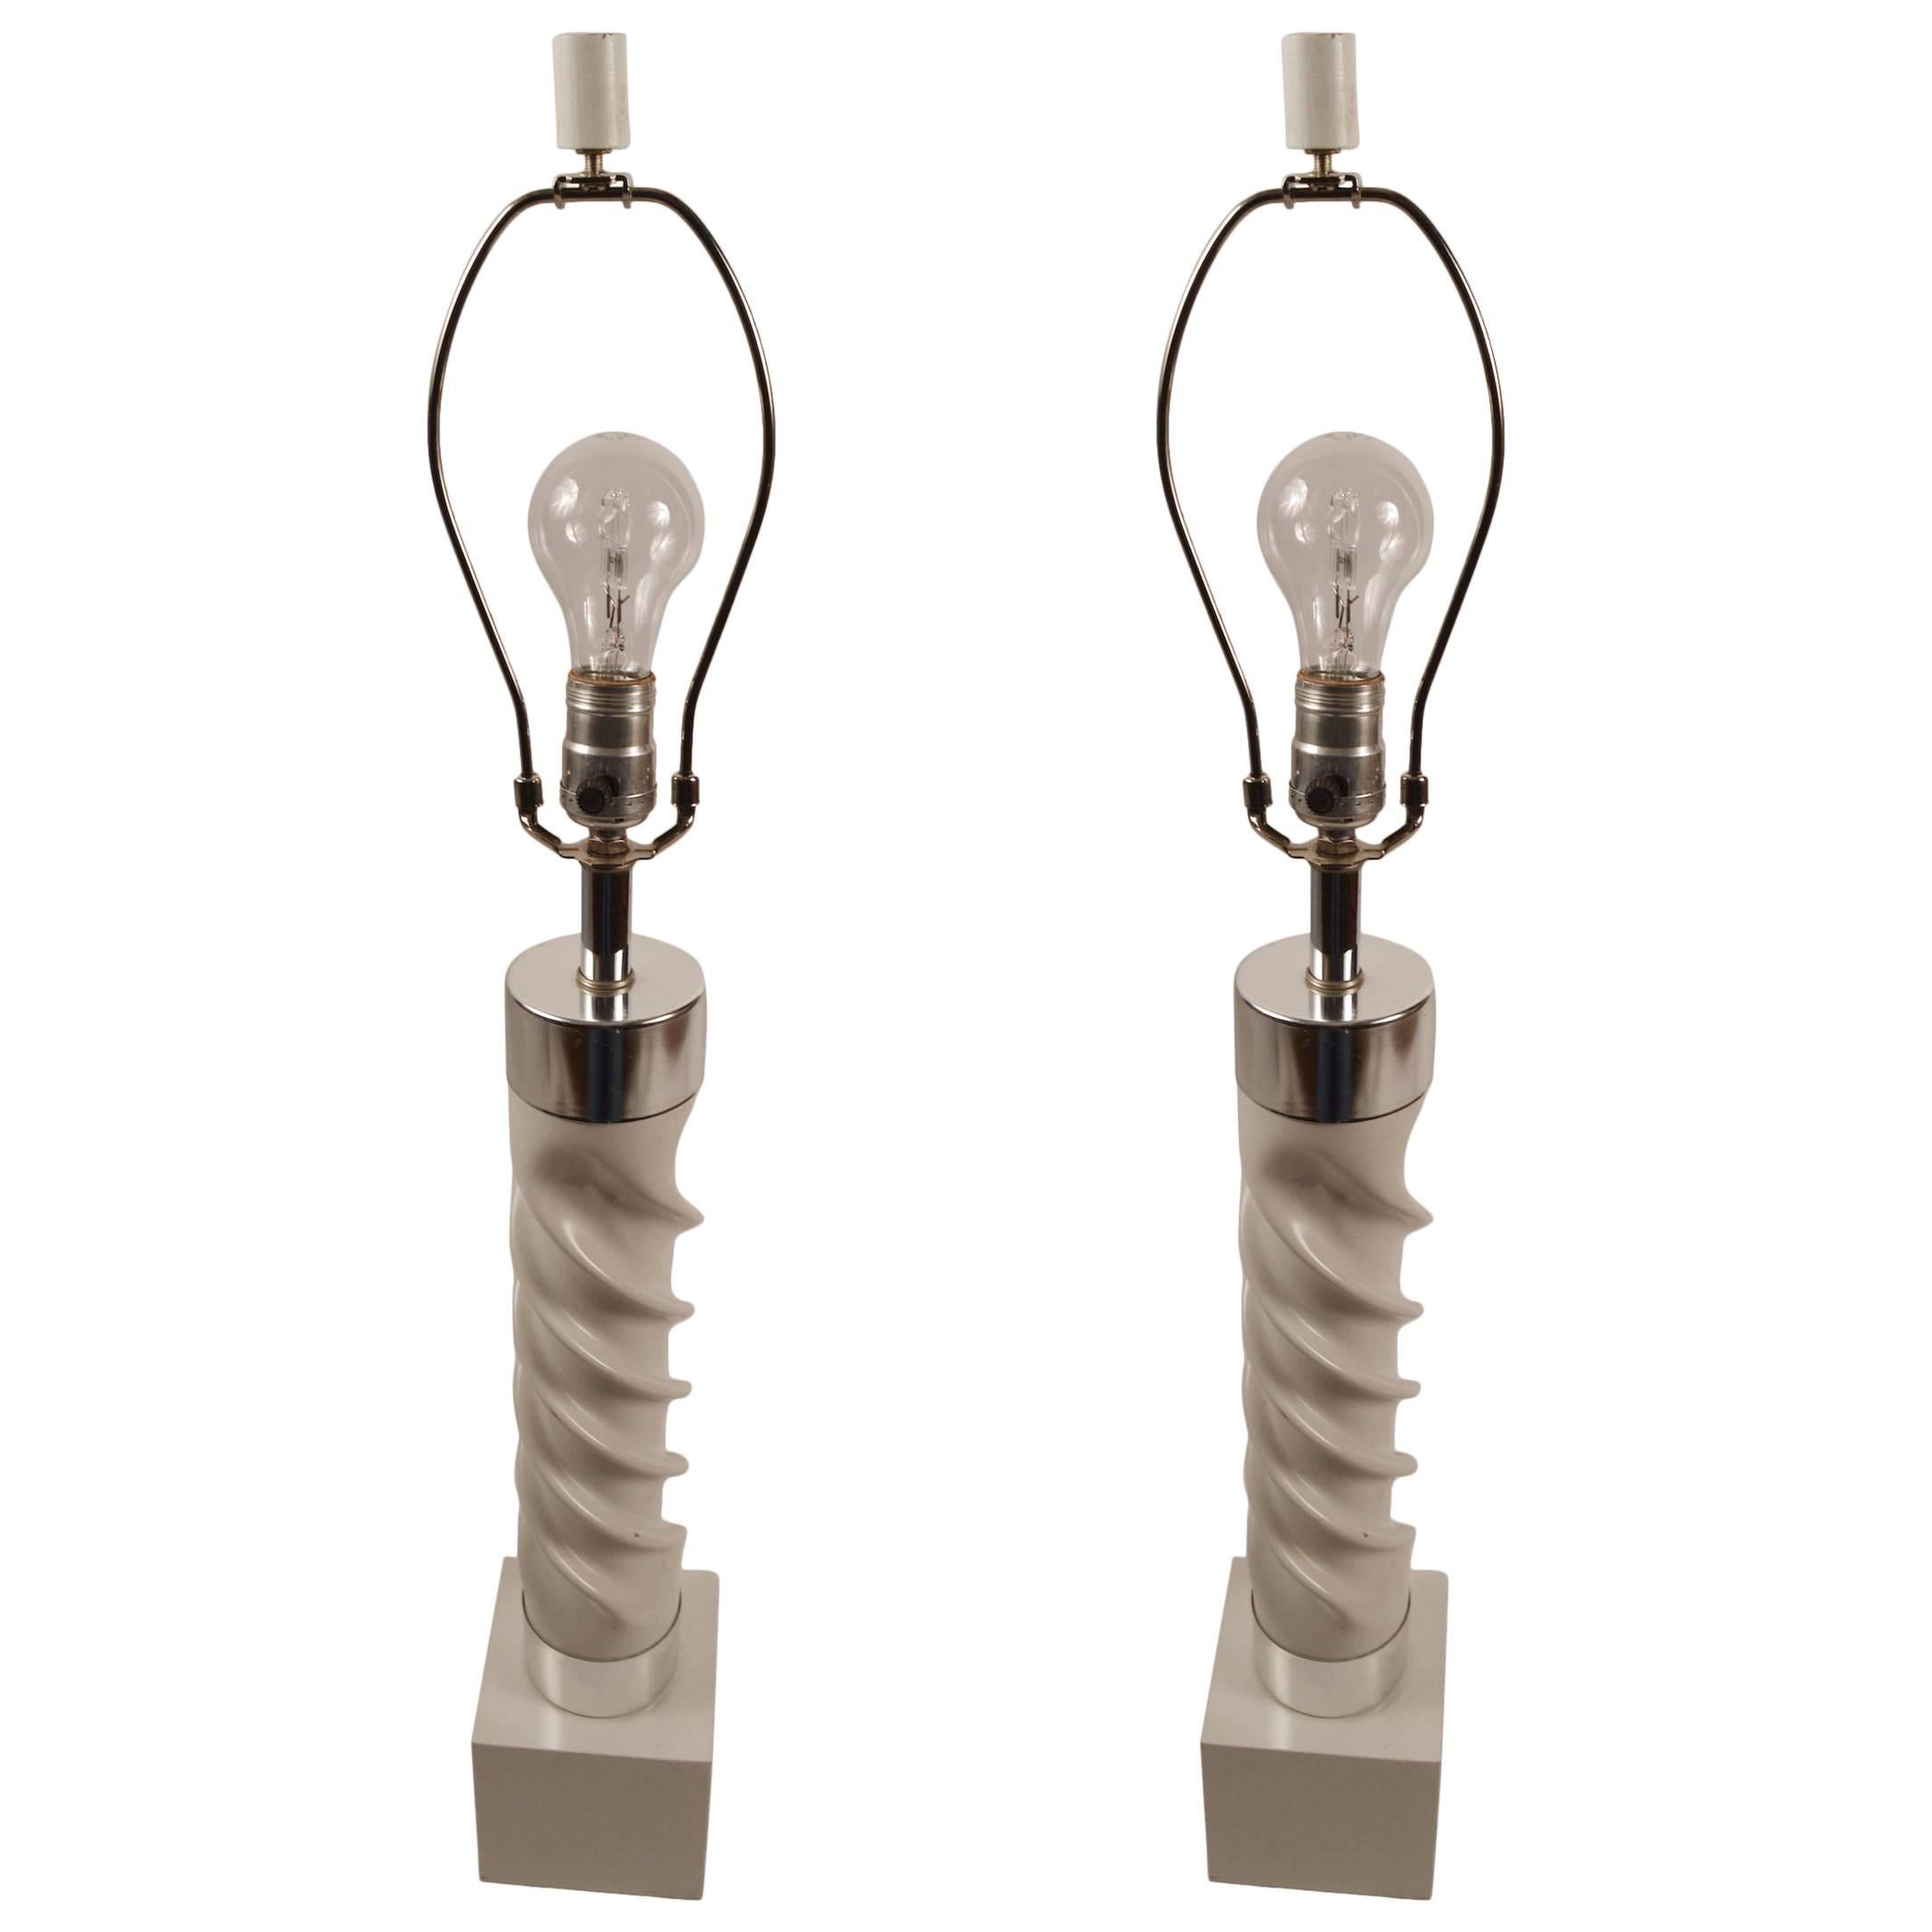 Pair of White and Chrome Twist Lamps